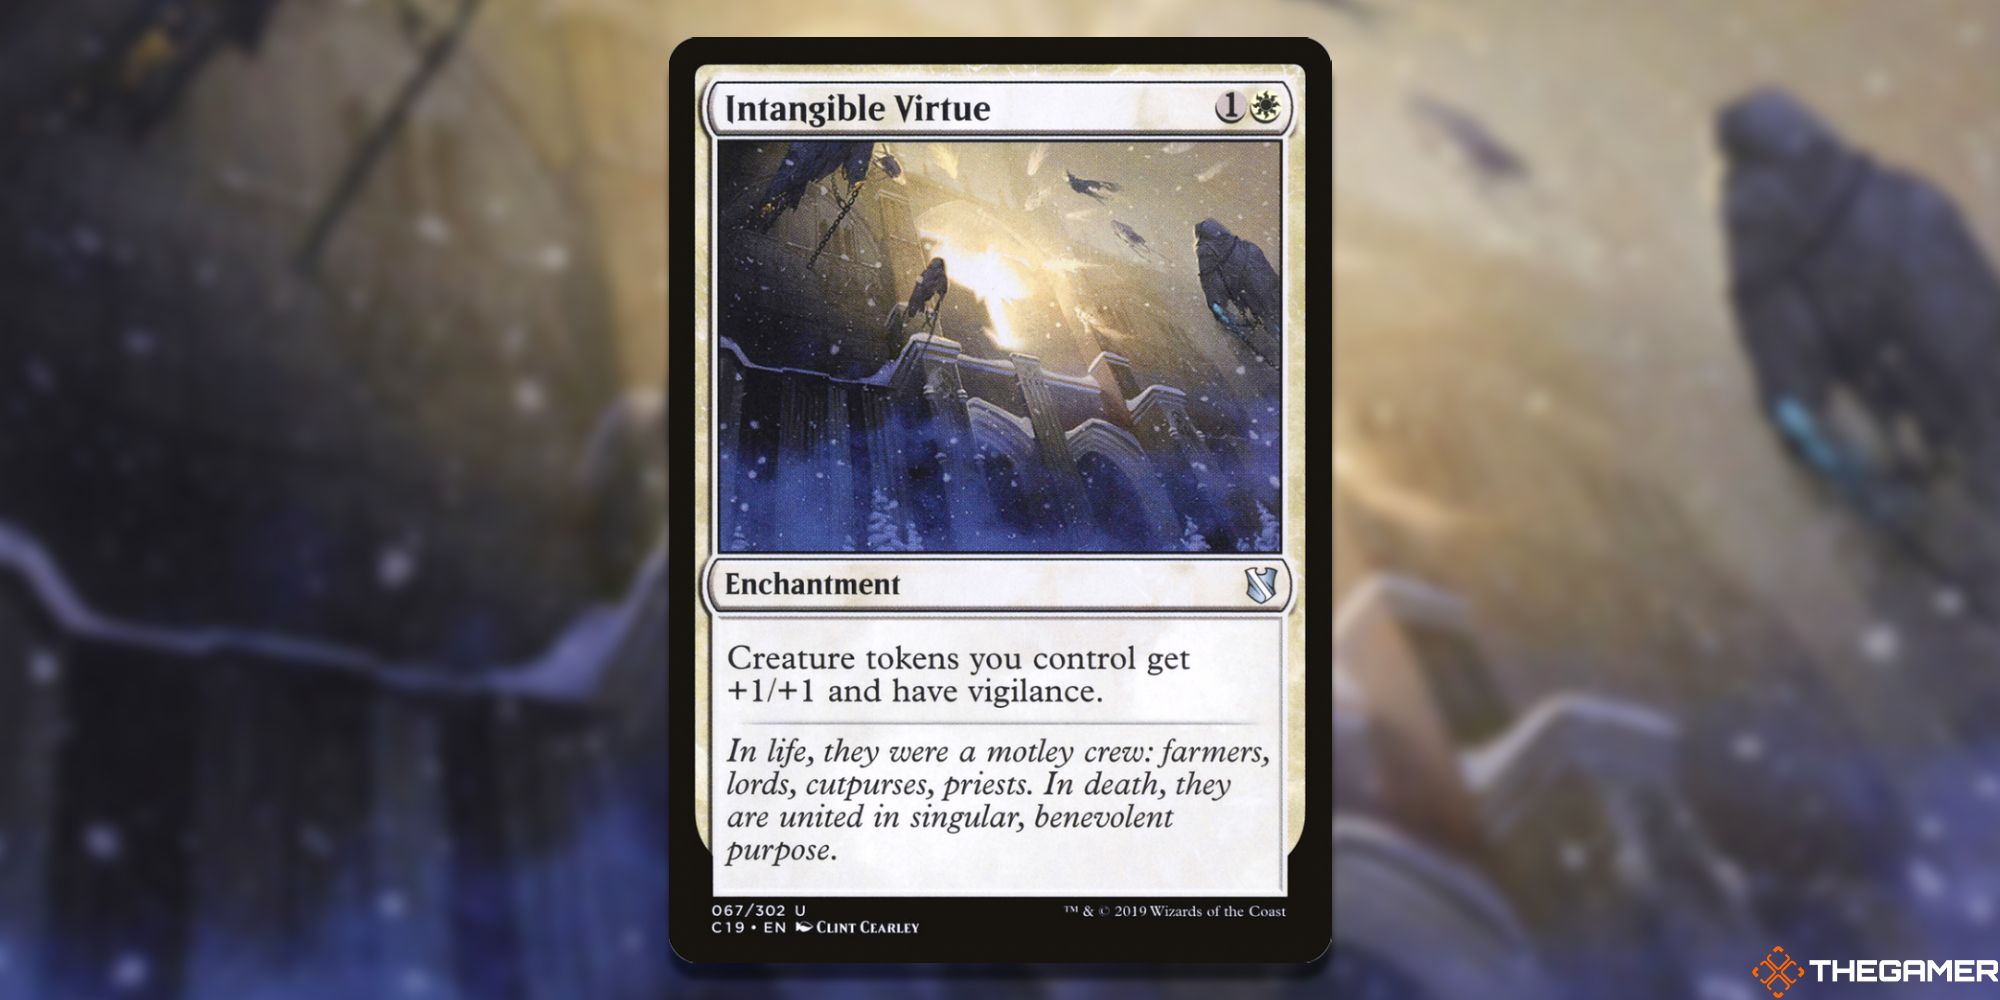 Image of the Intangible Virtue card in Magic: The Gathering, with art by Clint Cearley